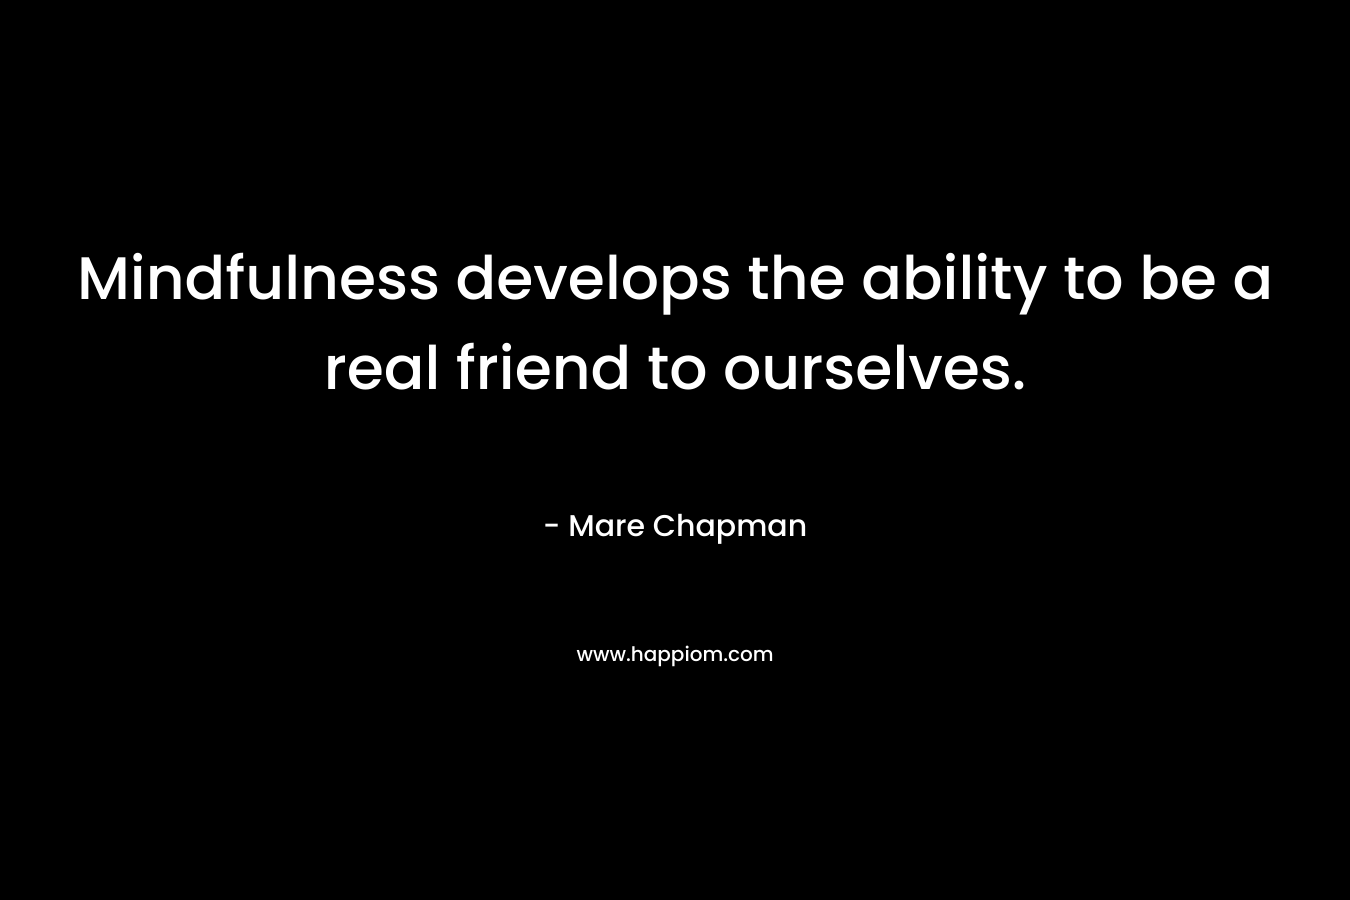 Mindfulness develops the ability to be a real friend to ourselves. – Mare Chapman